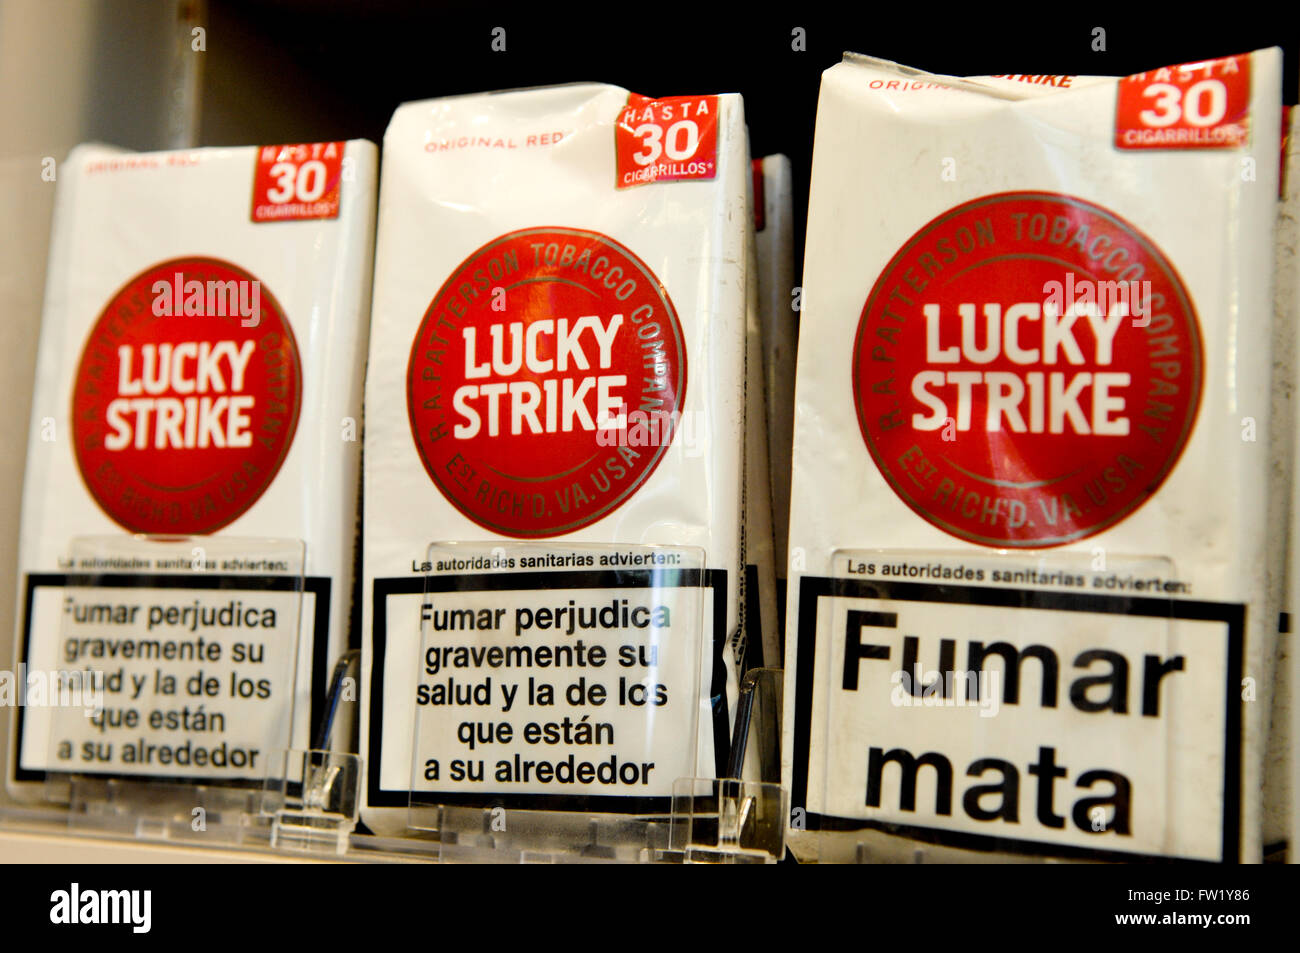 Lucky Strike Cigarettes produced by British American Tobacco on sale in a tobacconist. Stock Photo